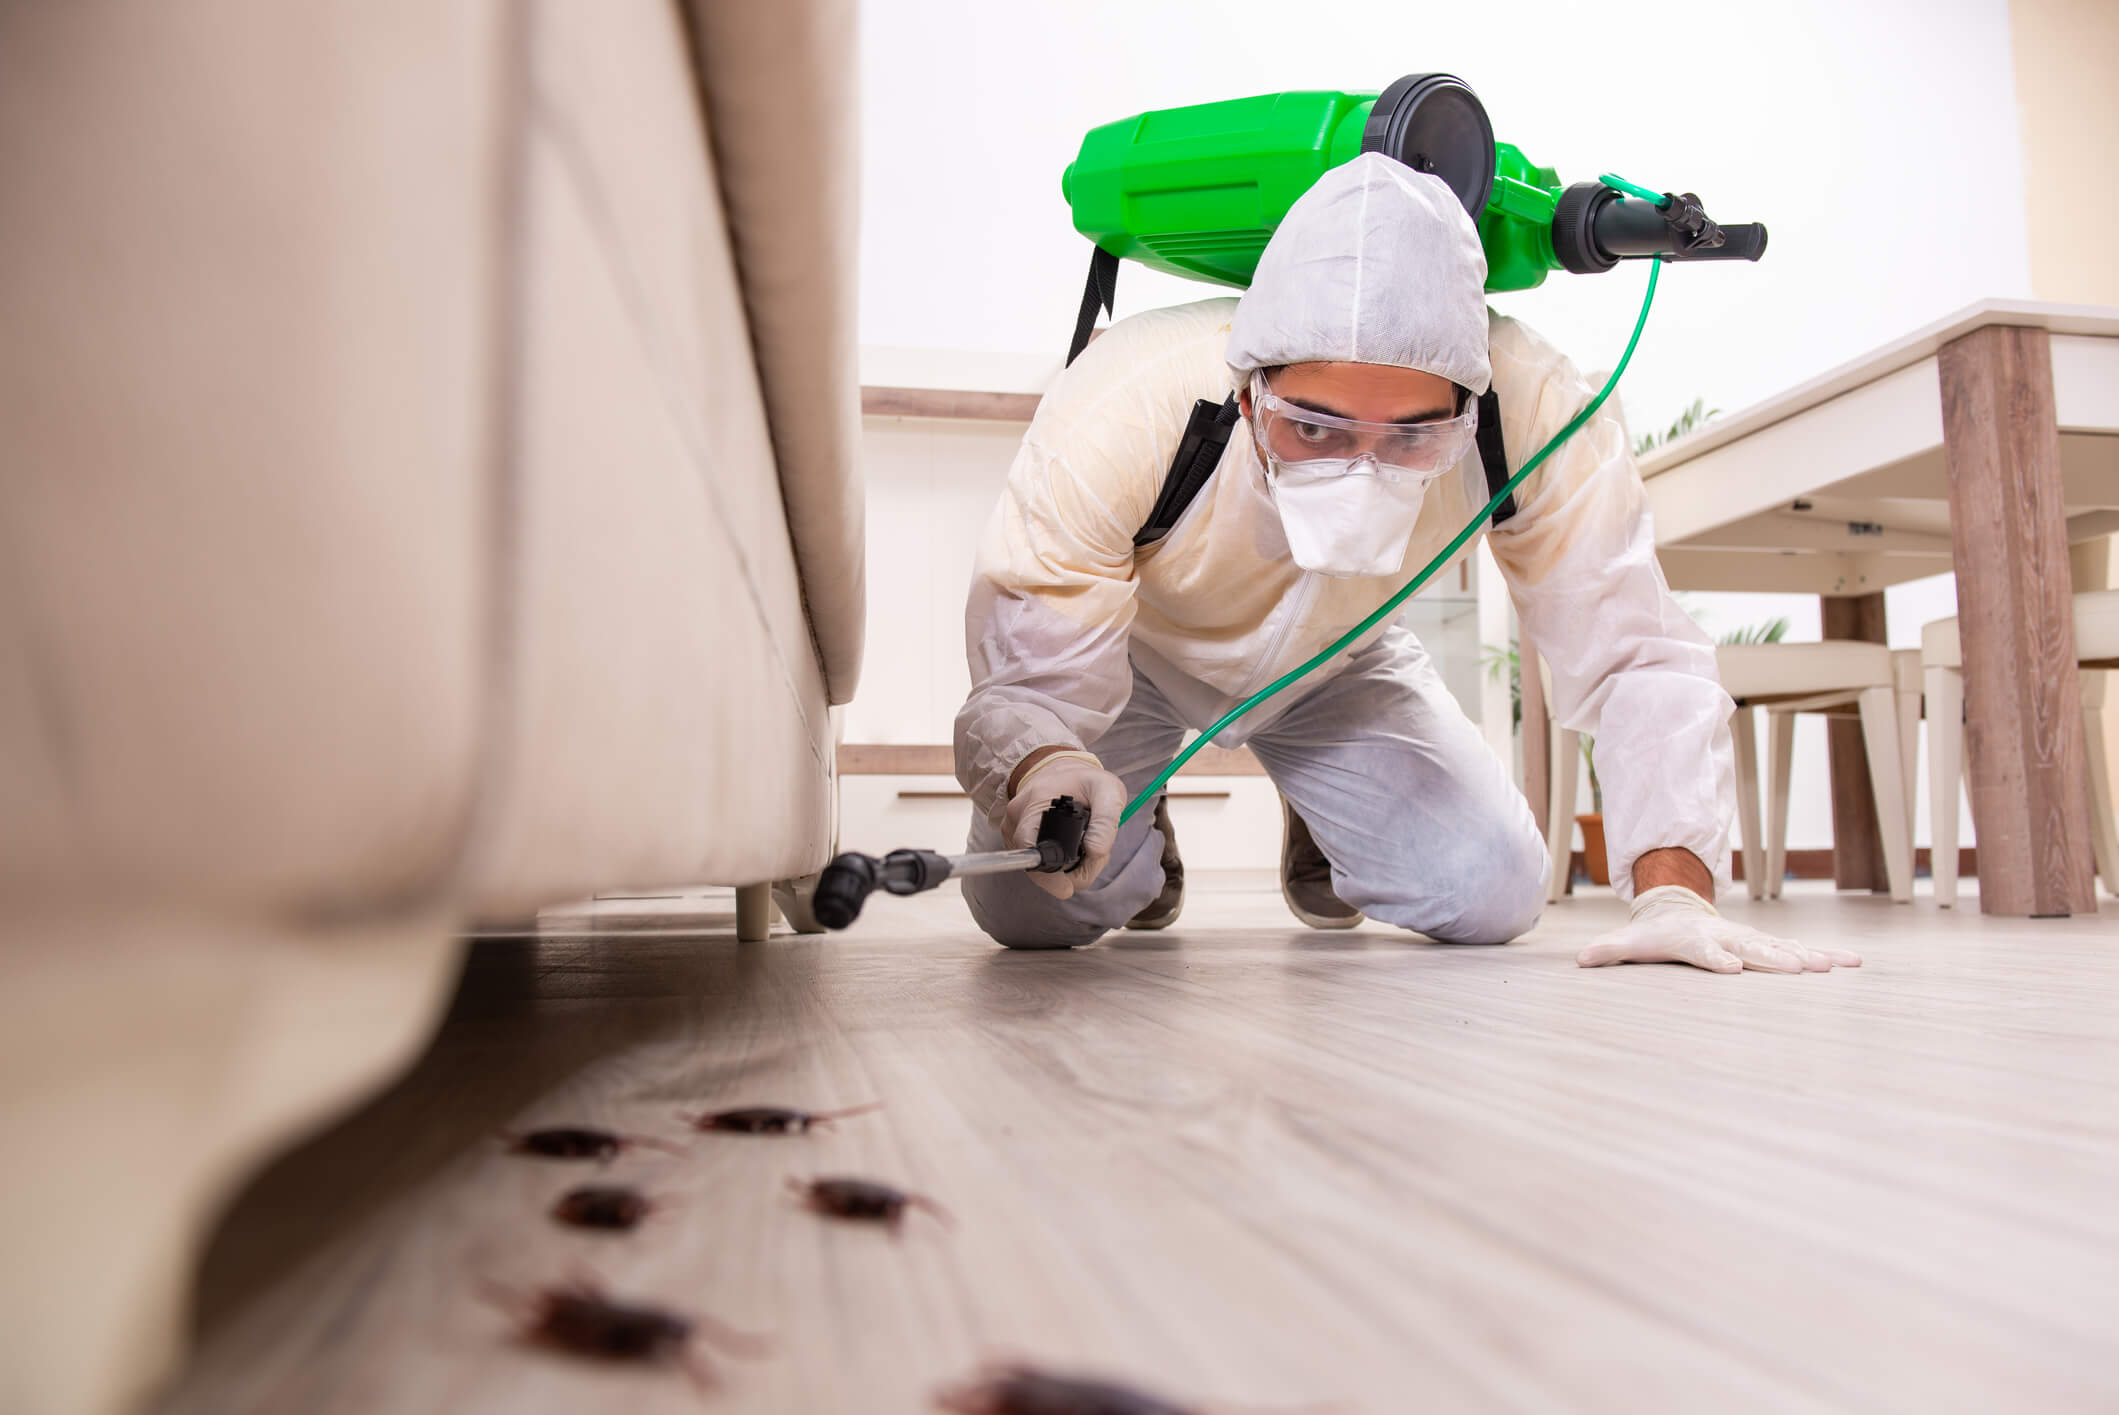 Pest control contractor using pesticides for pest prevention in a flat